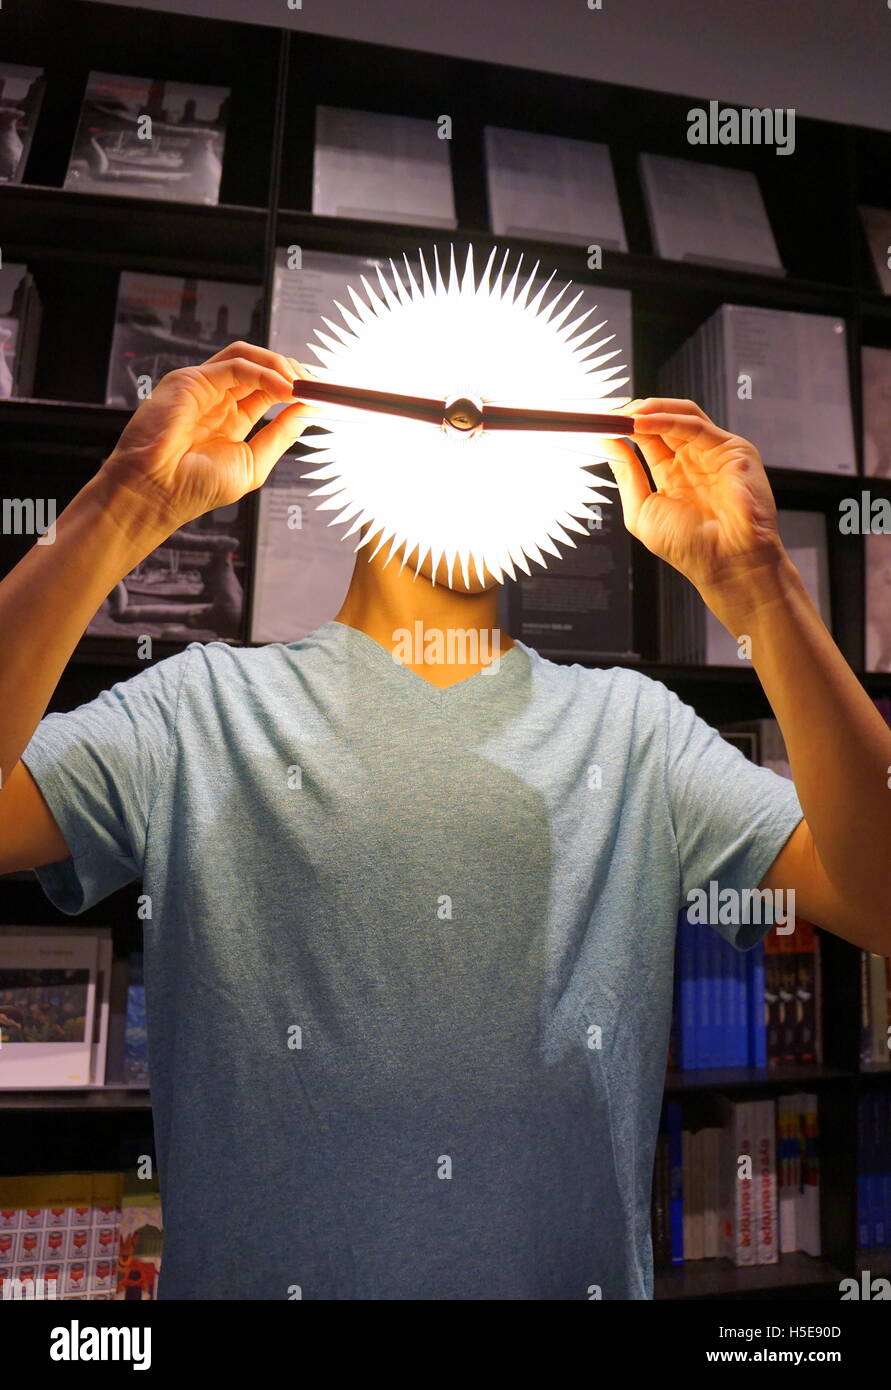 Teenage boy holding a Lumio Book Lamp against his face, creating the  illusion of a "bright idea", Museum of Modern Arts, NYC USA Stock Photo -  Alamy